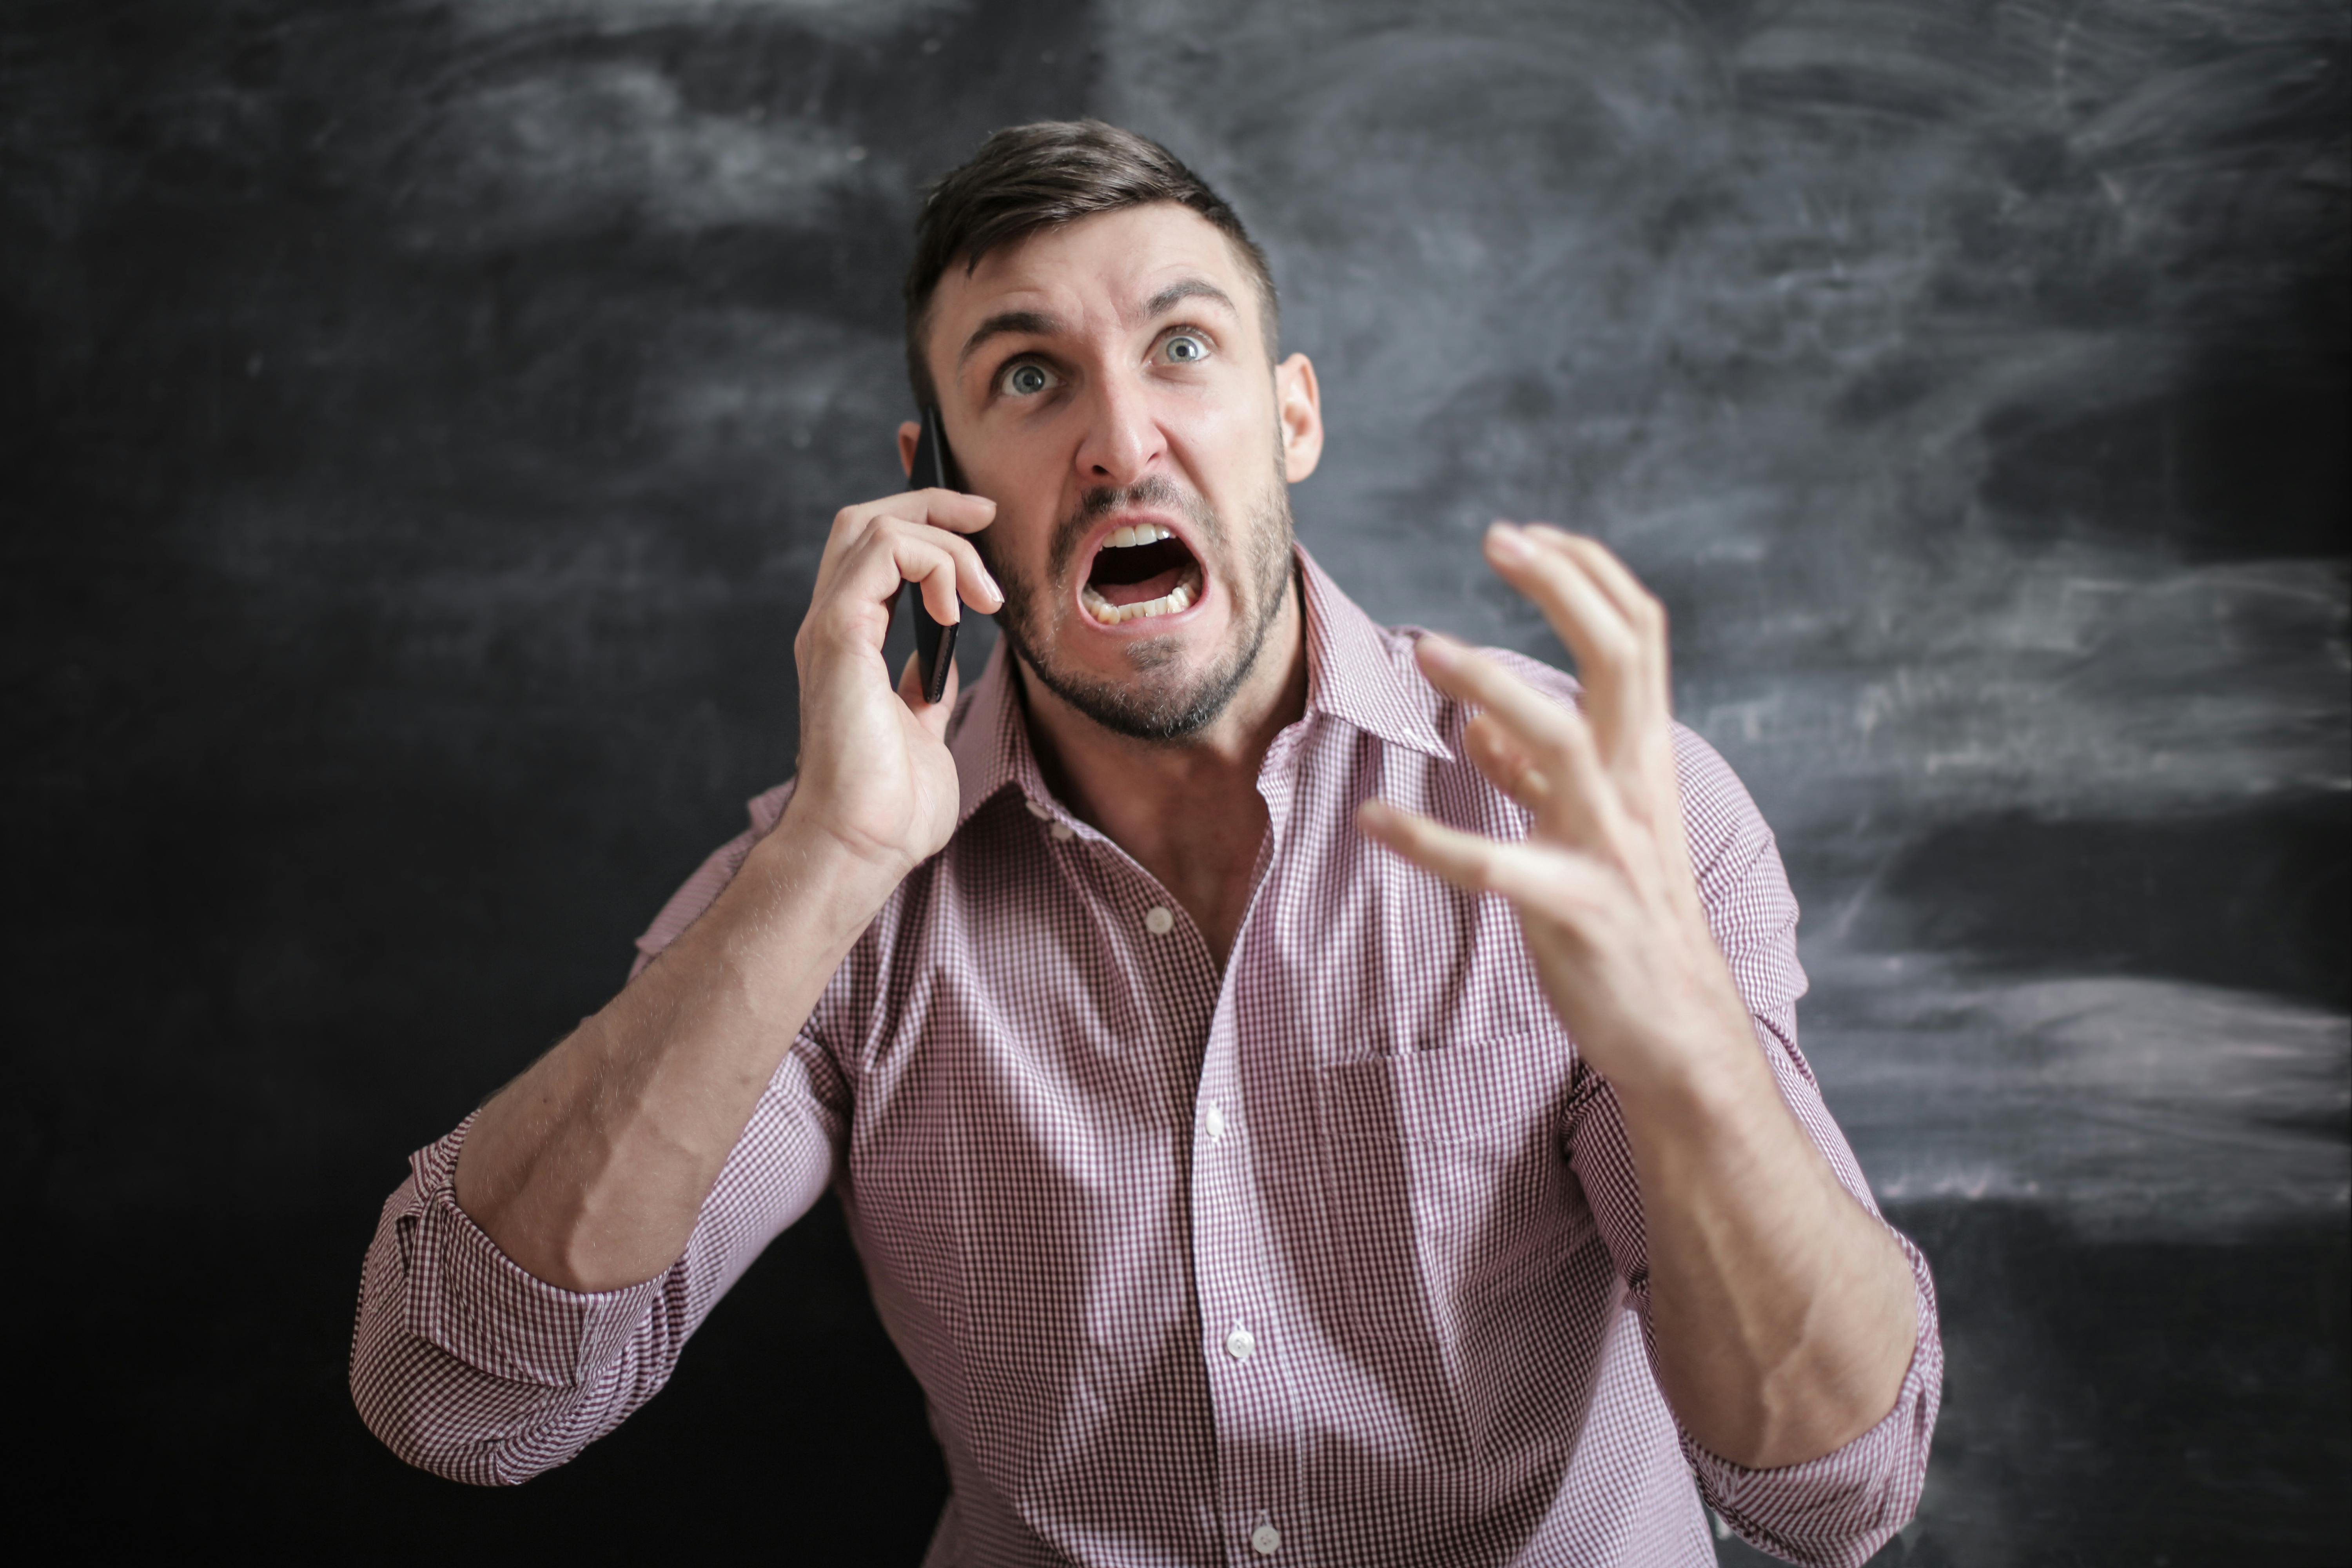 An angry man making a call | Source: Pexels